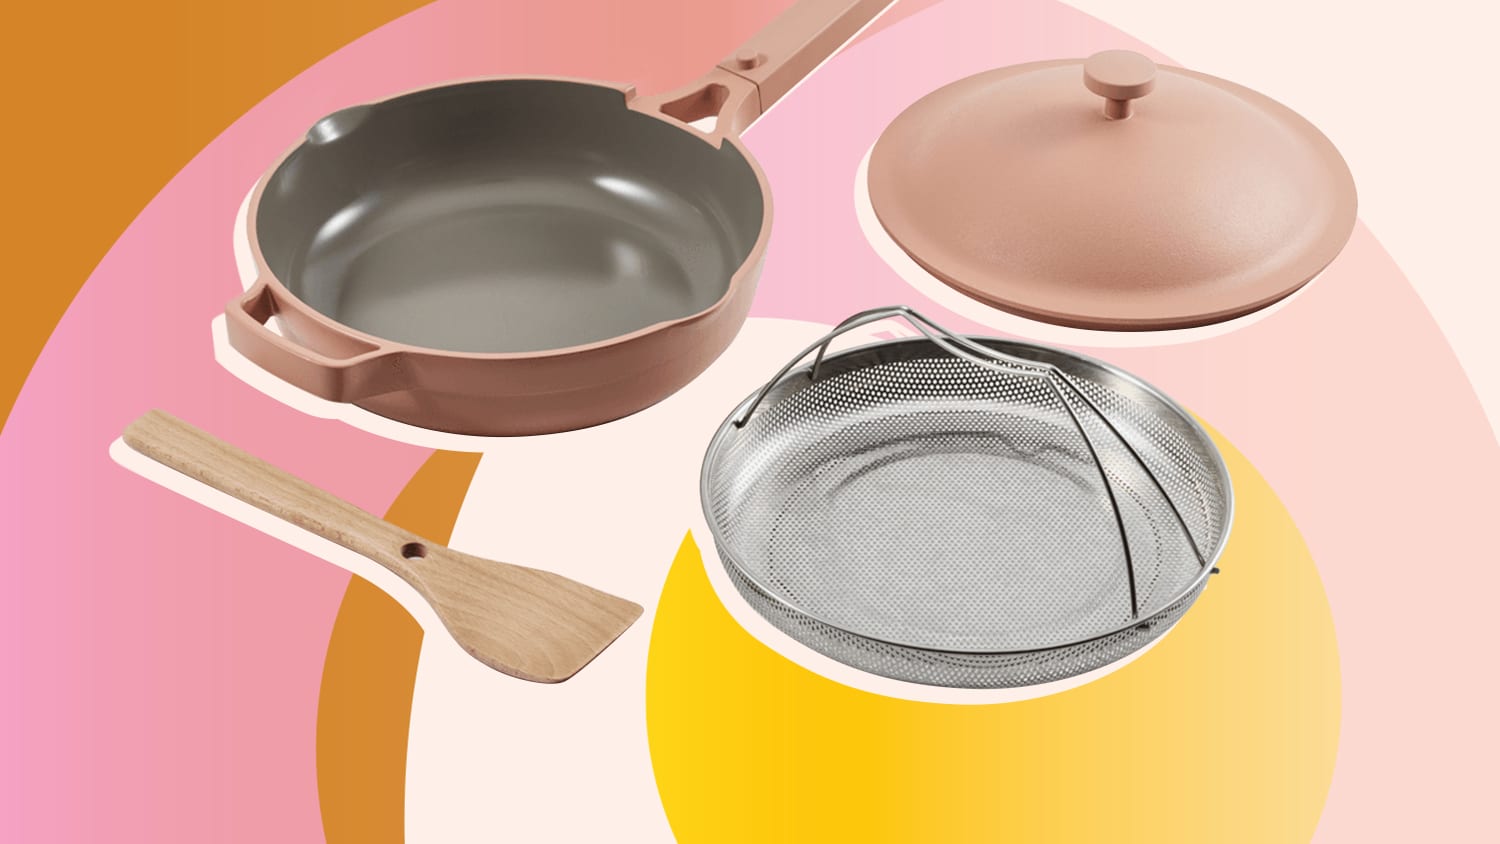 This Easy-to-Clean Nonstick Cookware Passed Our Editors' Rigorous Tests,  and Right Now It's Over 50% Off